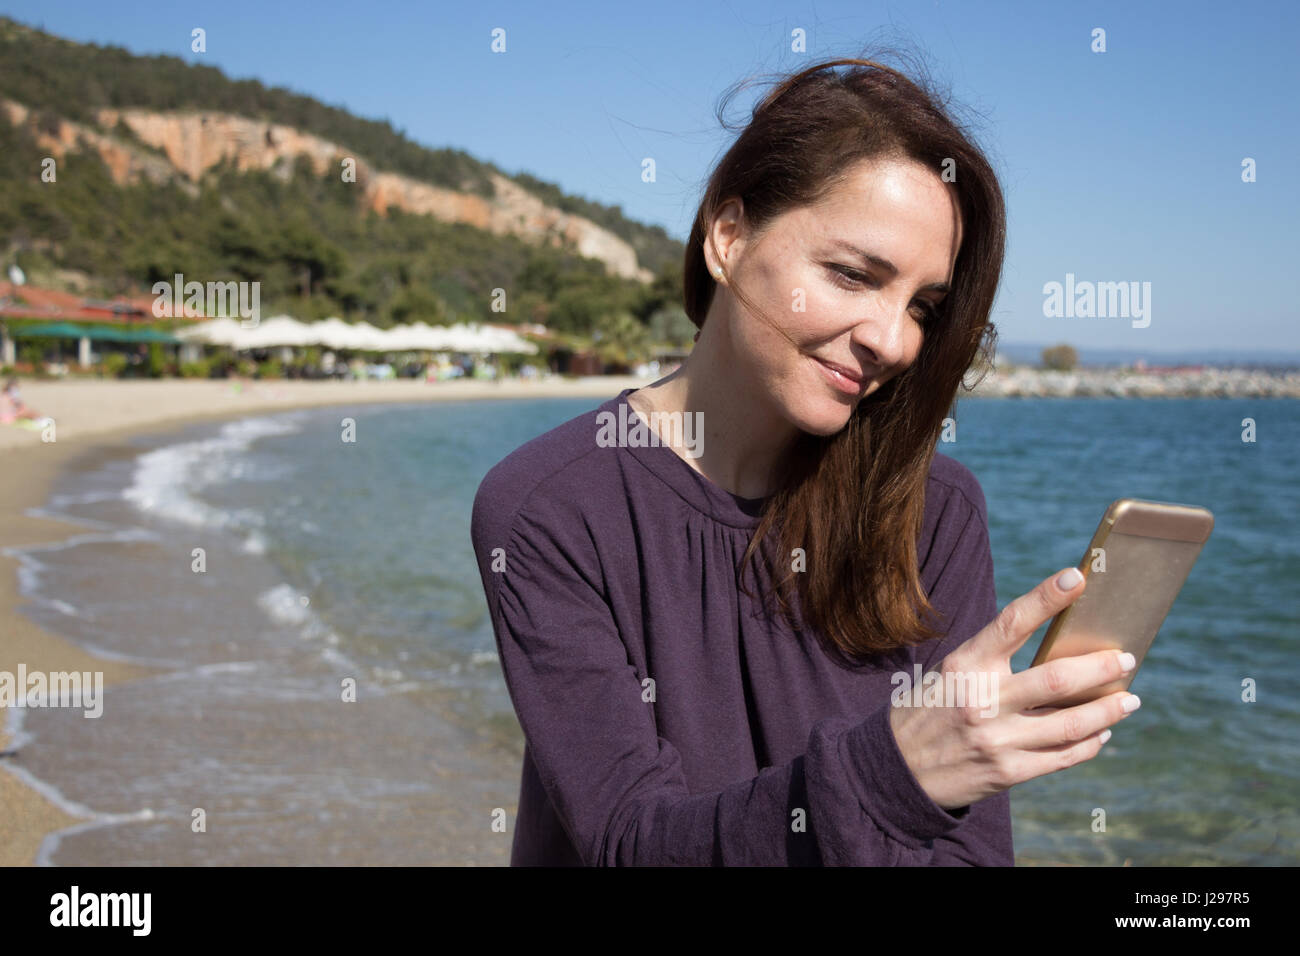 Woman looking her mobile at the beach, smiling. Stock Photo